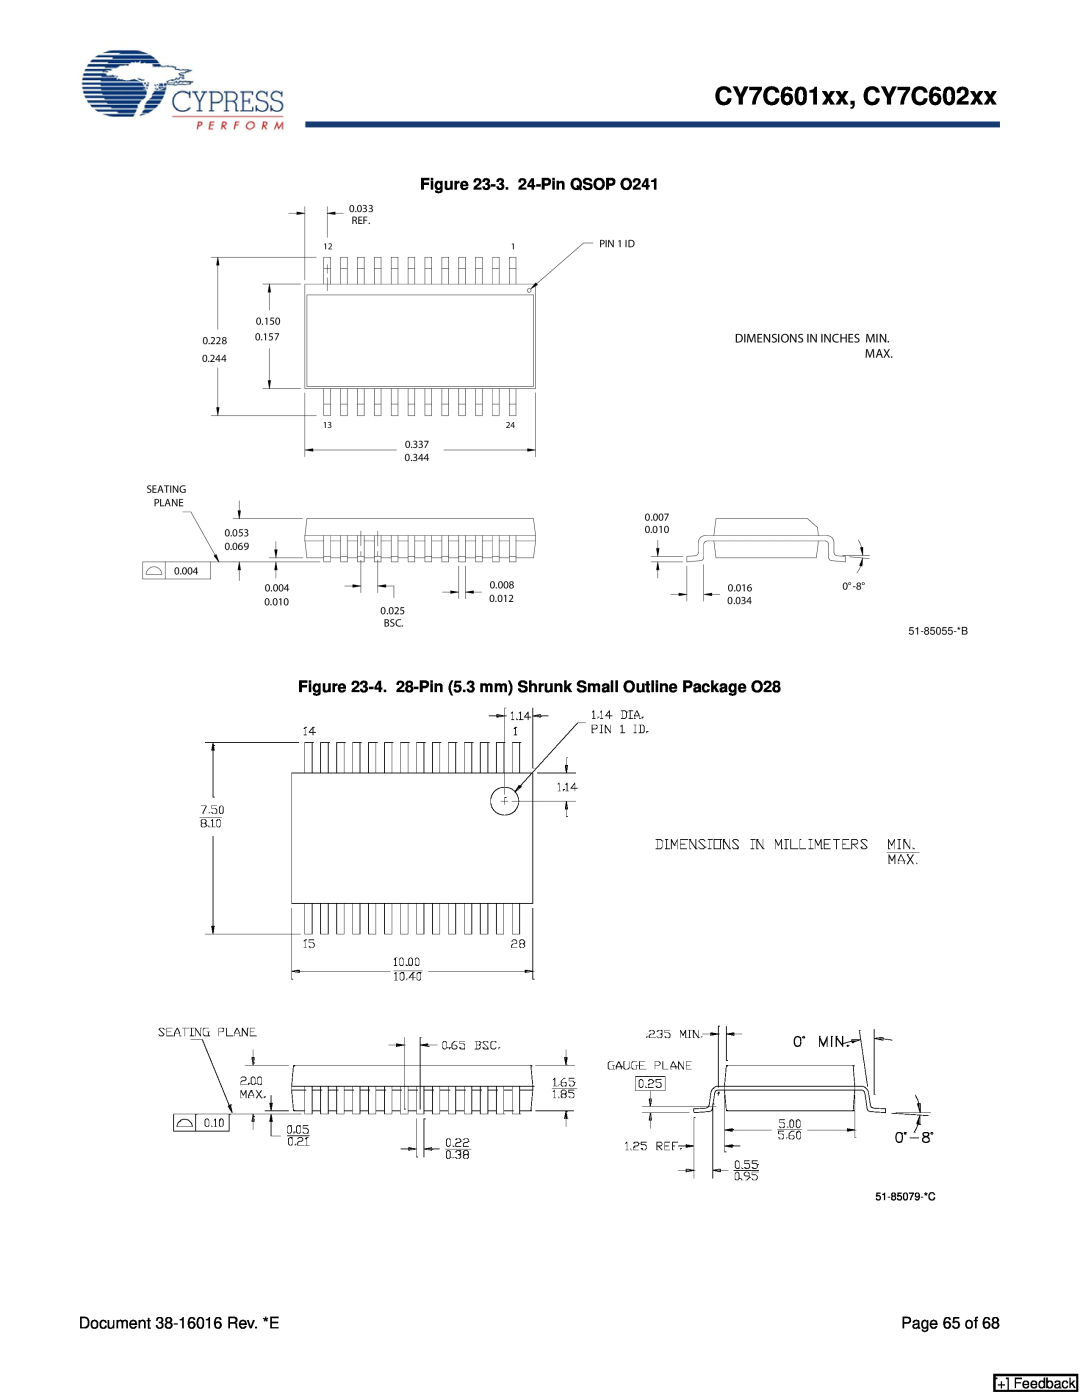 Cypress manual 3. 24-Pin QSOP O241, 4. 28-Pin 5.3 mm Shrunk Small Outline Package O28, CY7C601xx, CY7C602xx, Page 65 of 